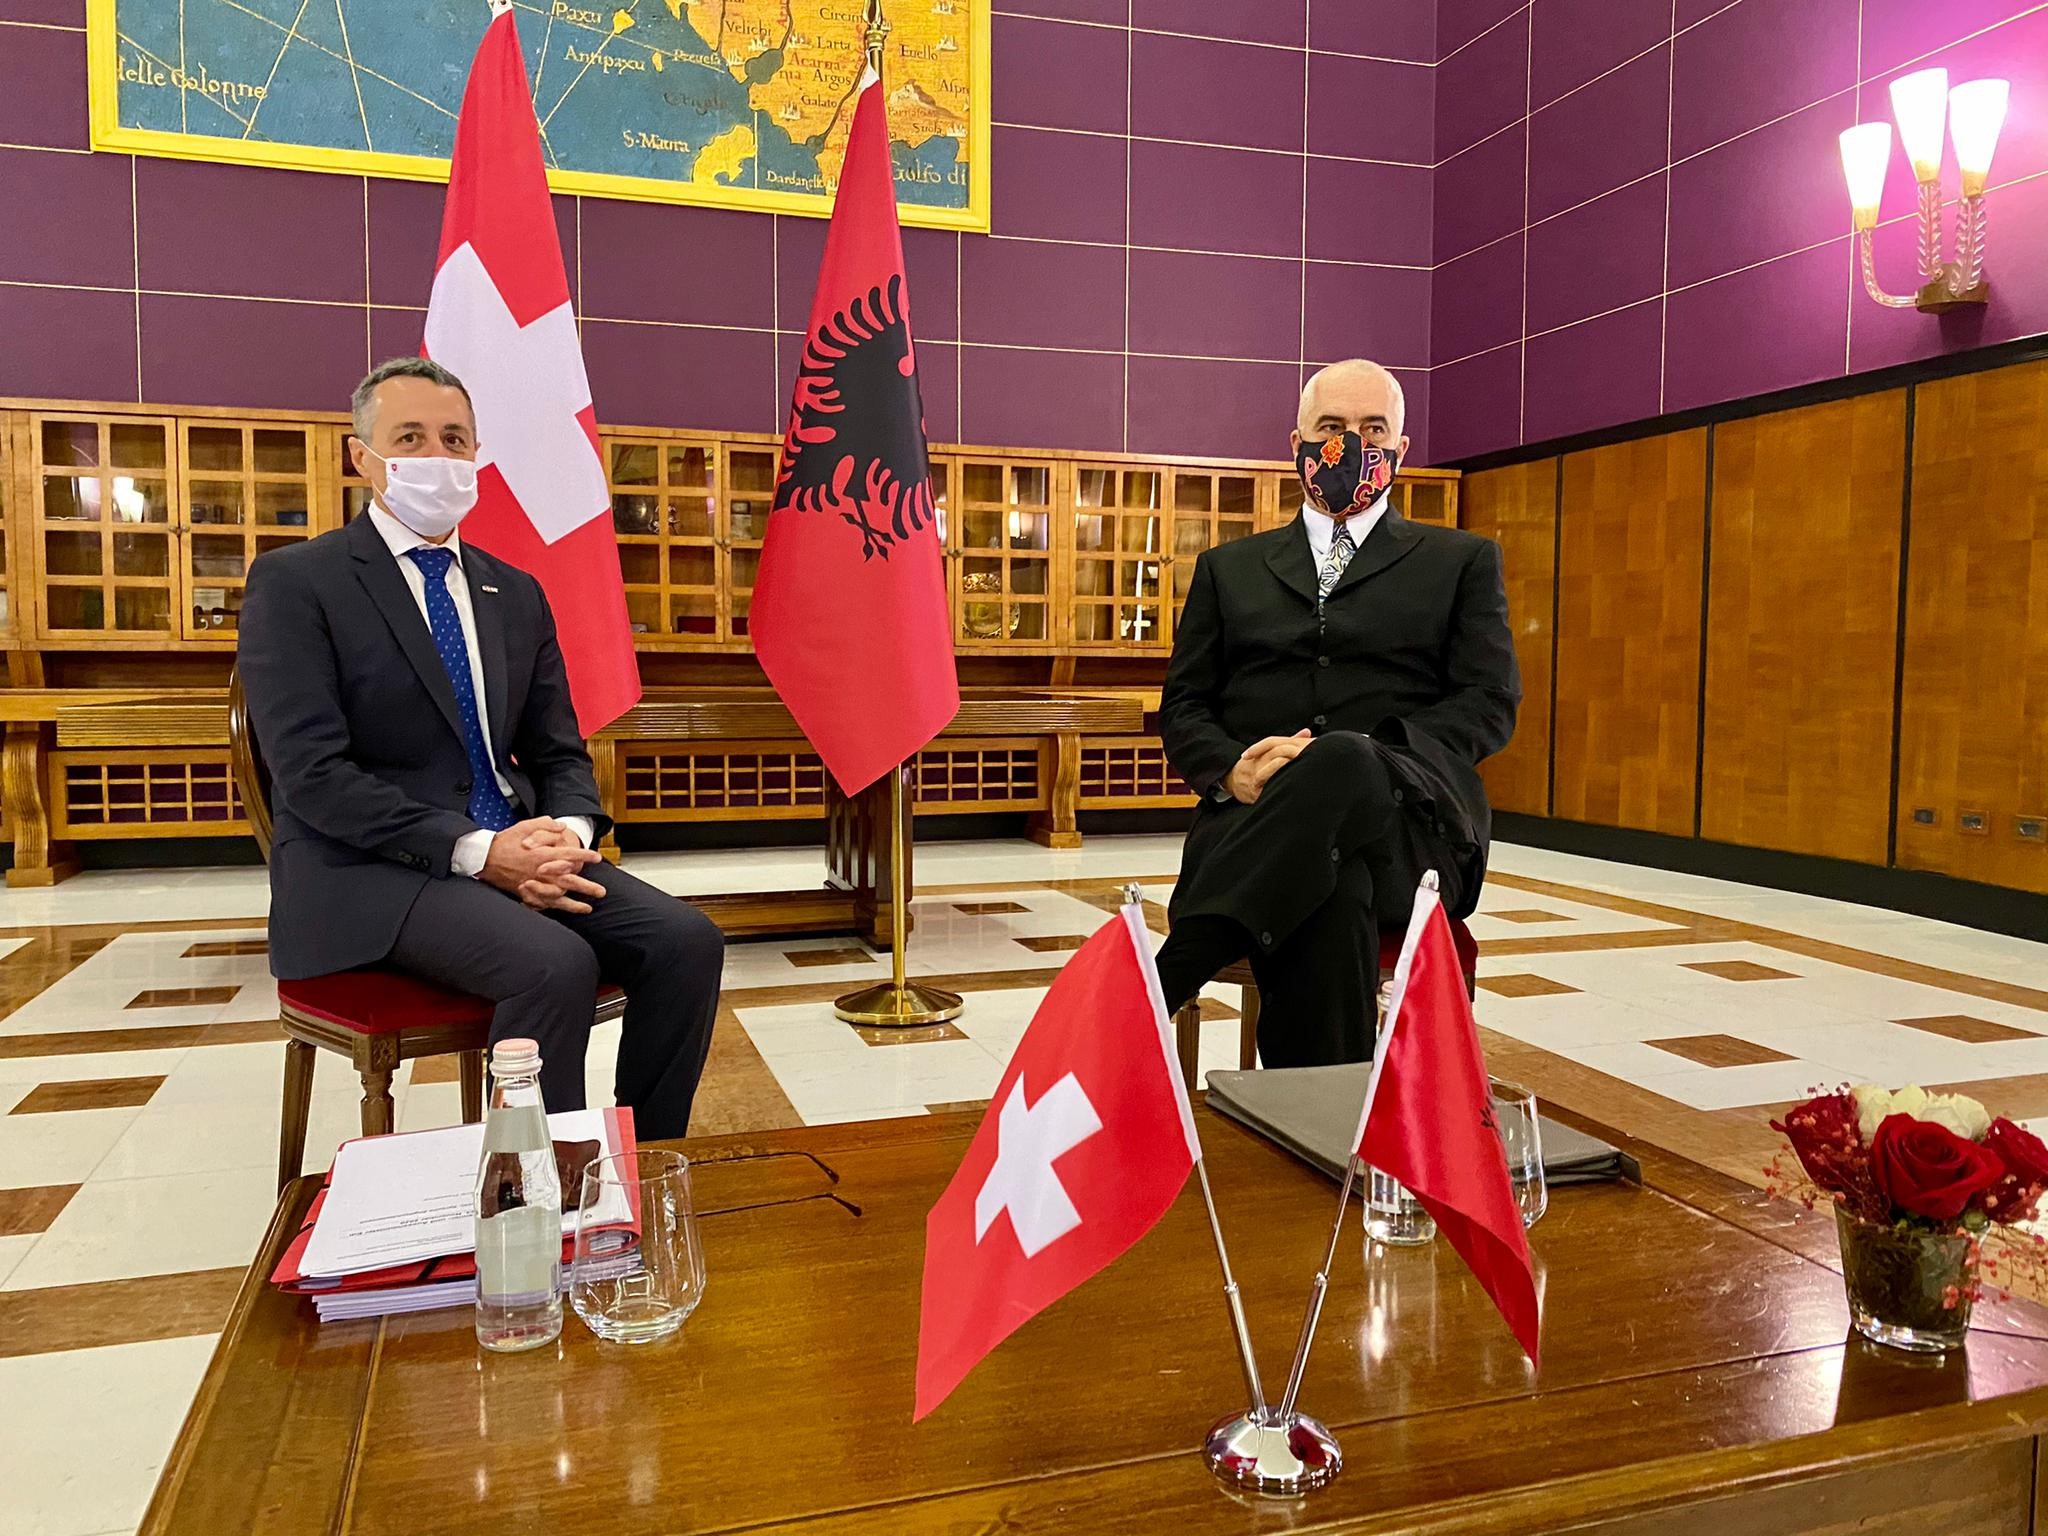 Federal Councilor Ignazio Cassis met with Albania's President Ilir Meta, Prime Minister Edi Rama and Acting Minister for Europe and Foreign Affairs Gent Cakaj. He met also the Minister for Reconstruction Arben Ahmetaj and visiteted houses renovated in Shijak with Swiss support. 